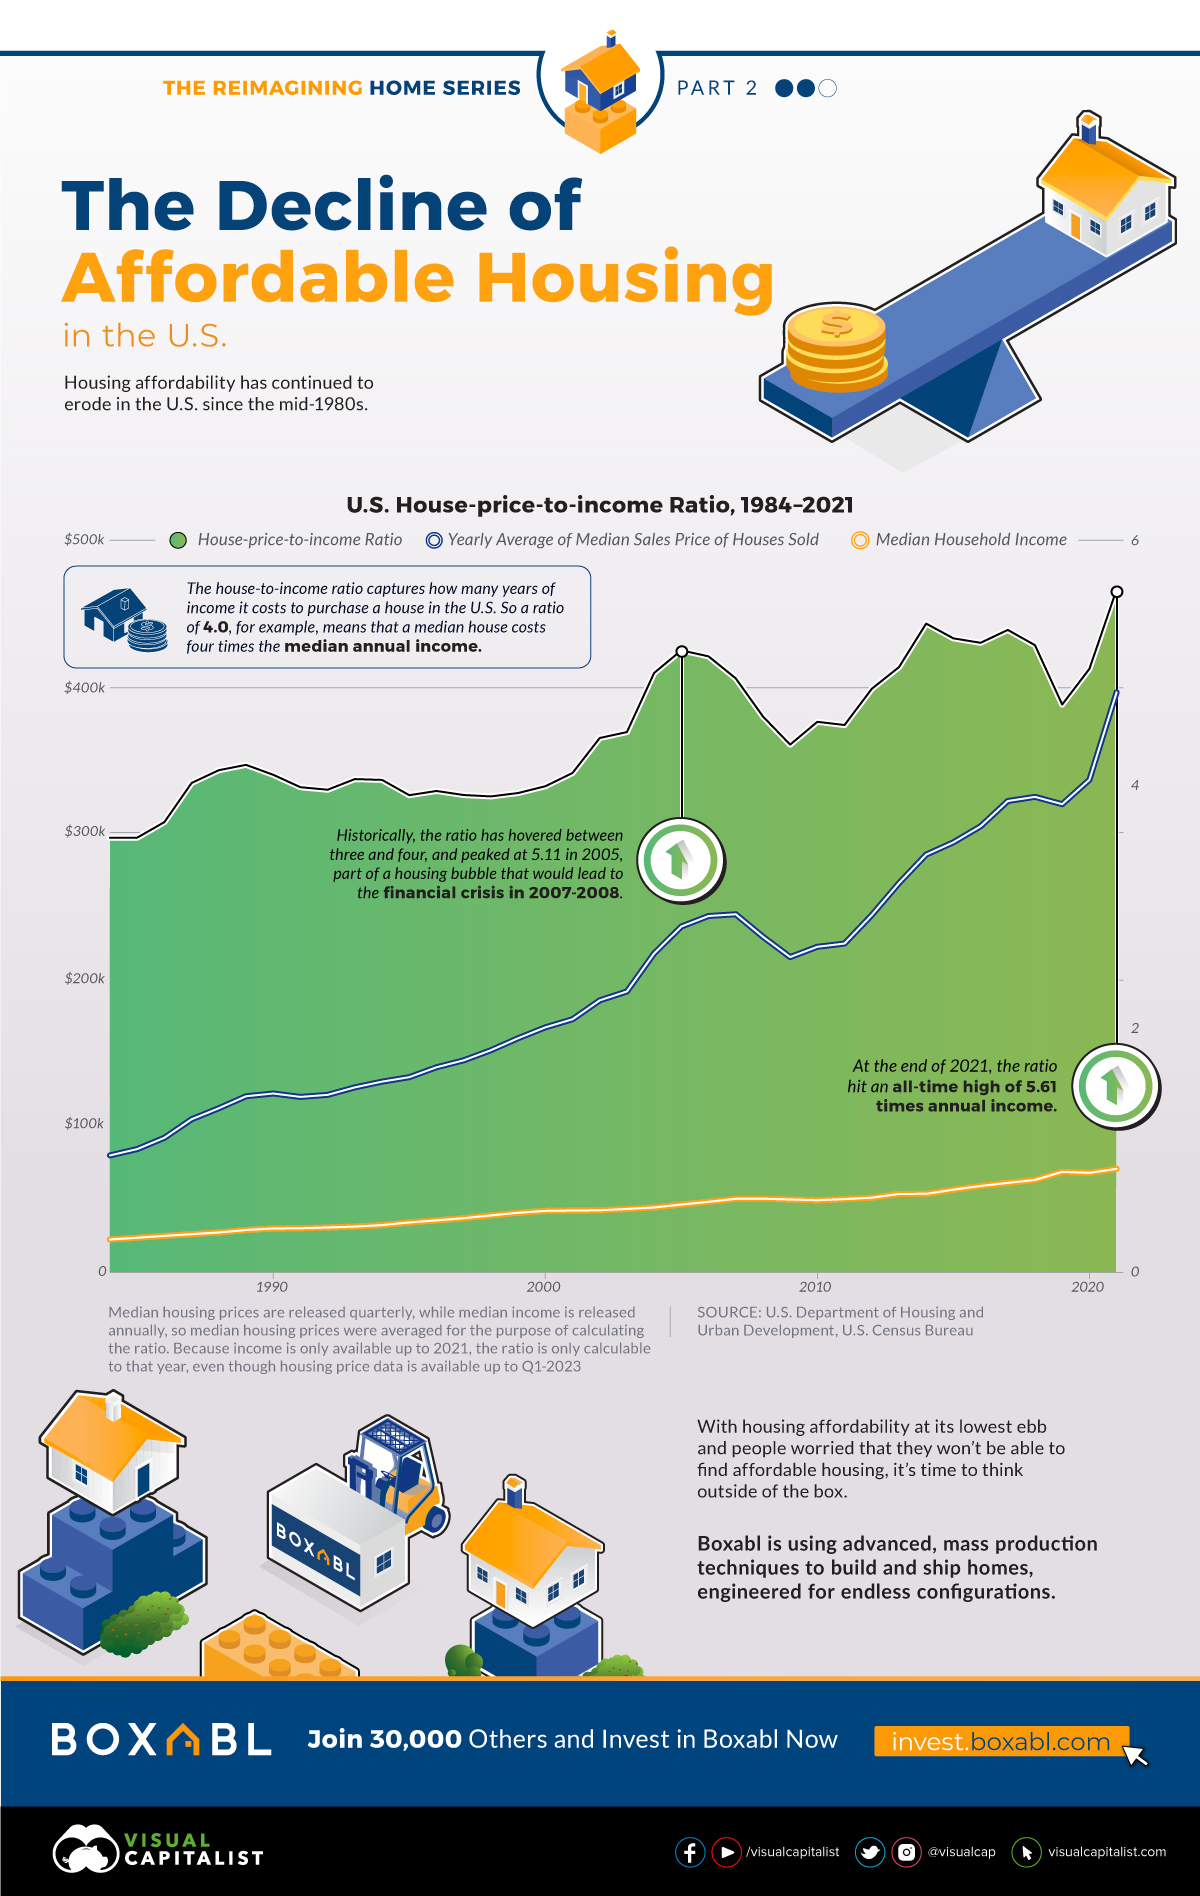 Infographic showing how U.S. house prices have risen between 1984 and 2021, in terms of multiples of household incomes.